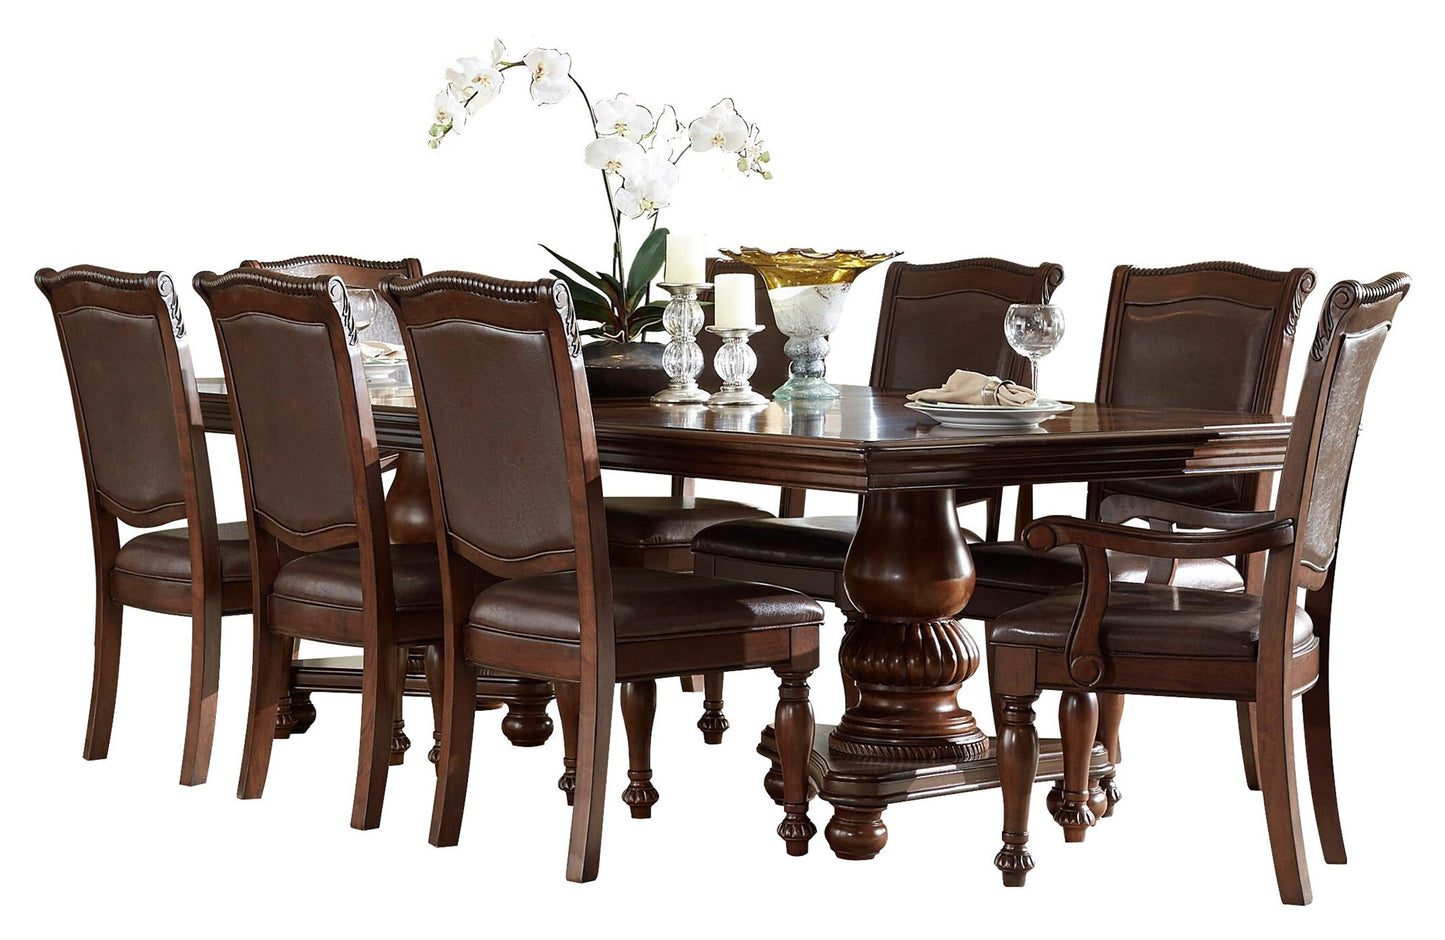 Homelegance Lordsburg 9PC Dining Set Double Pedestal Table, 2 Arm Chair, 6 Side Chair in Brown Cherry